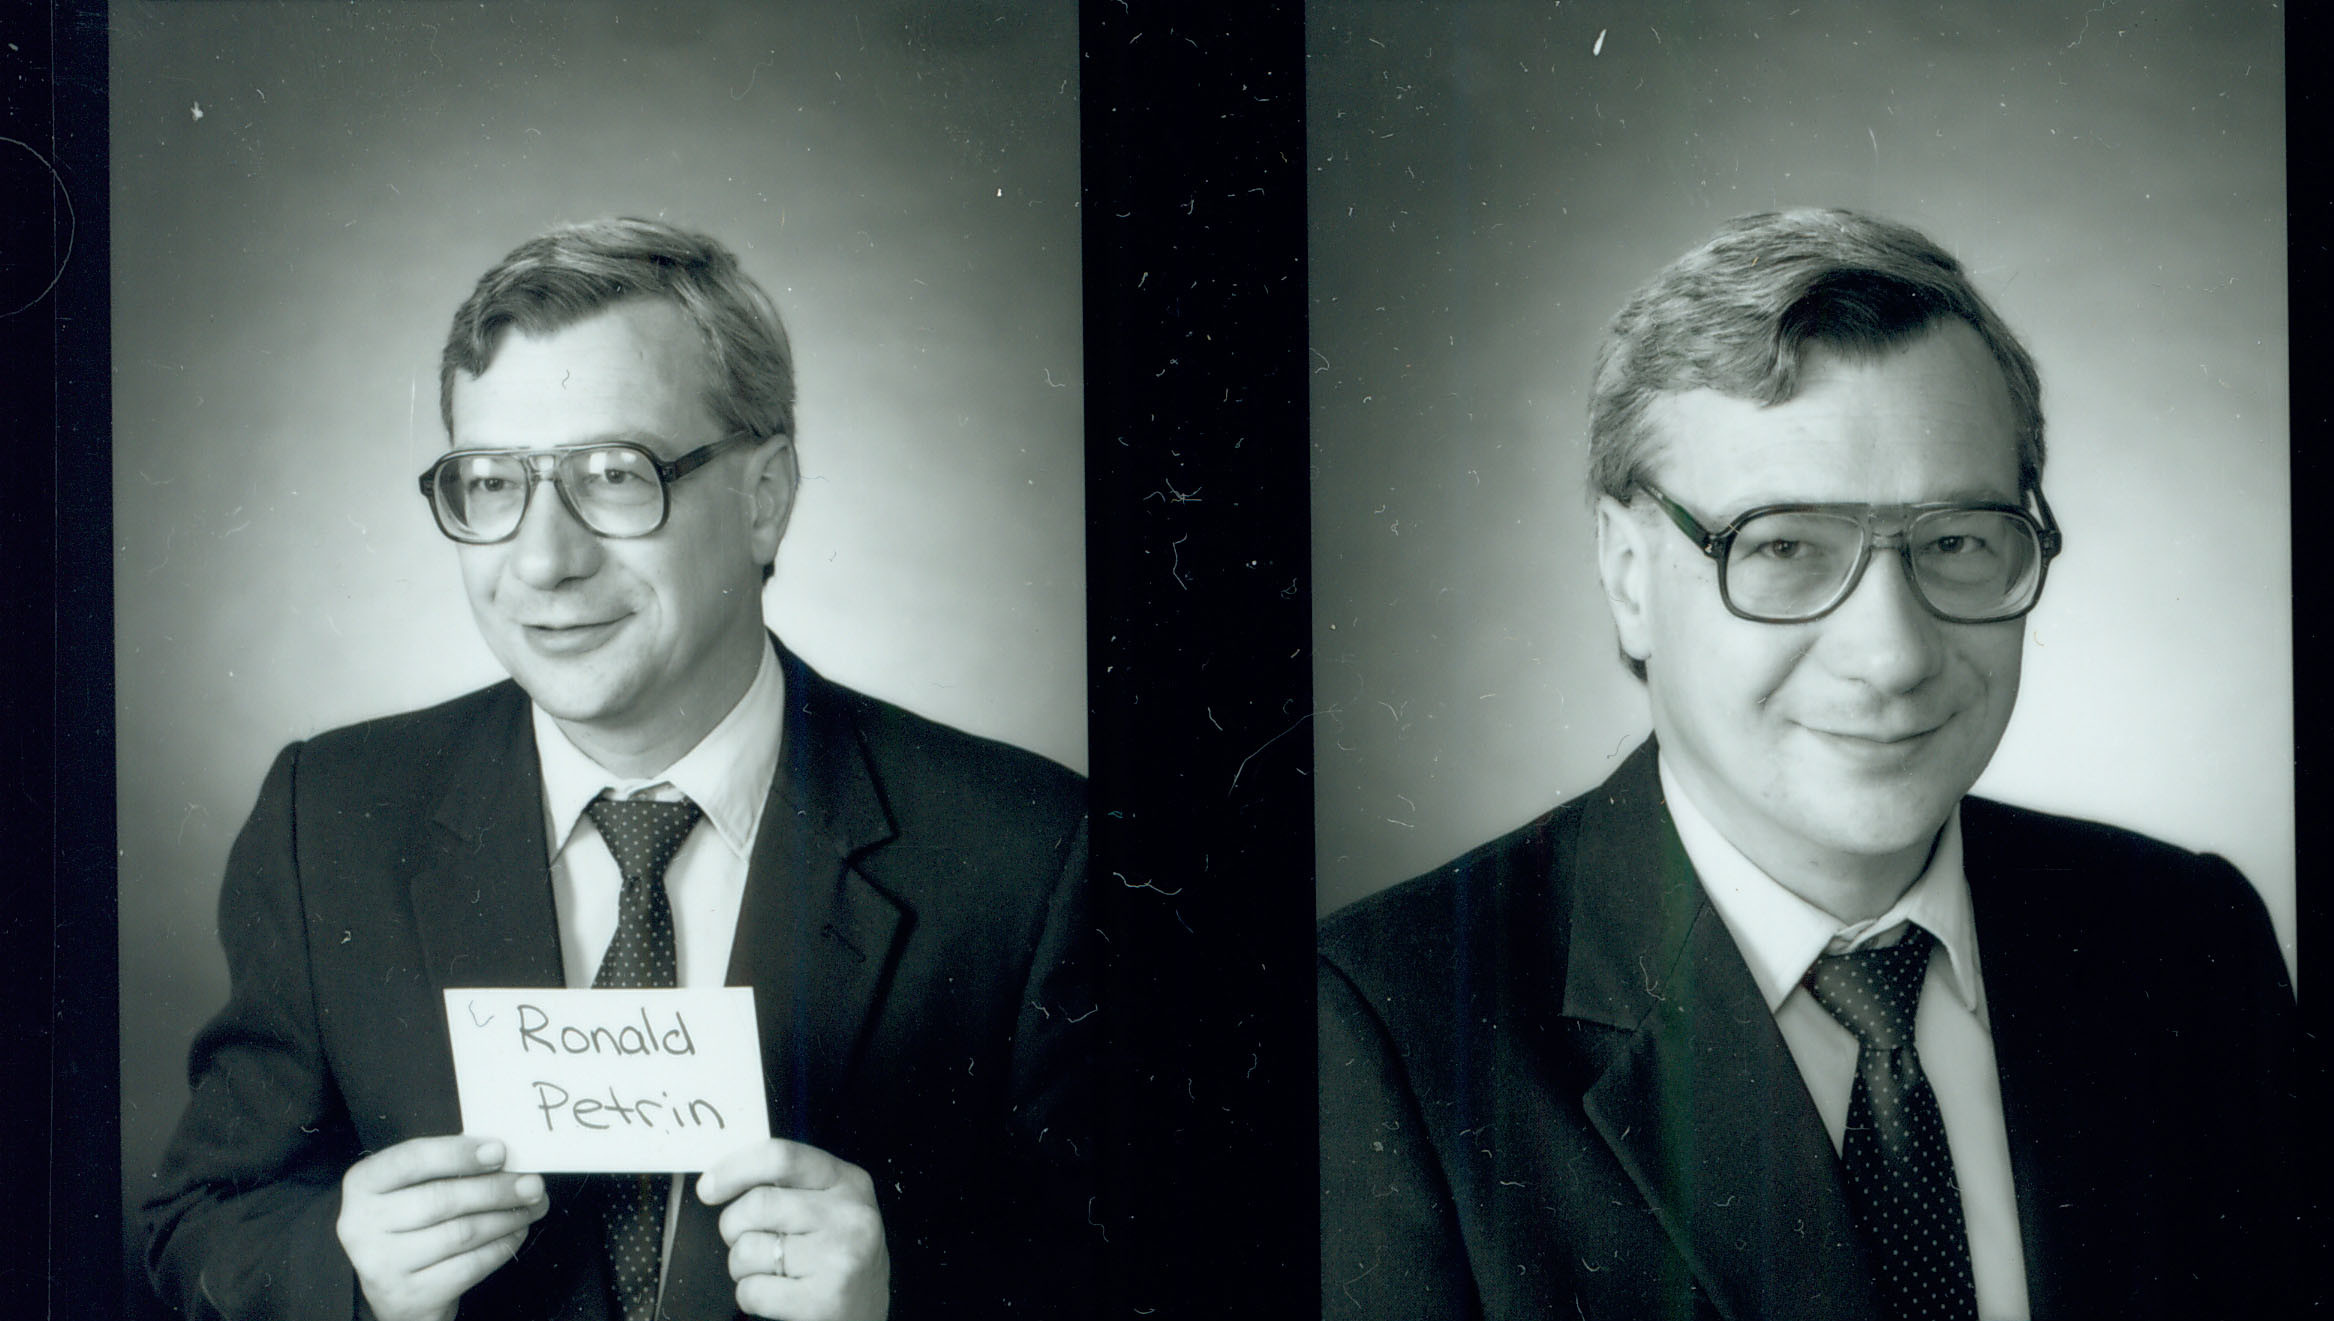 A mugshot of sorts.  Dr. Petrin poses for his OSU faculty ID.